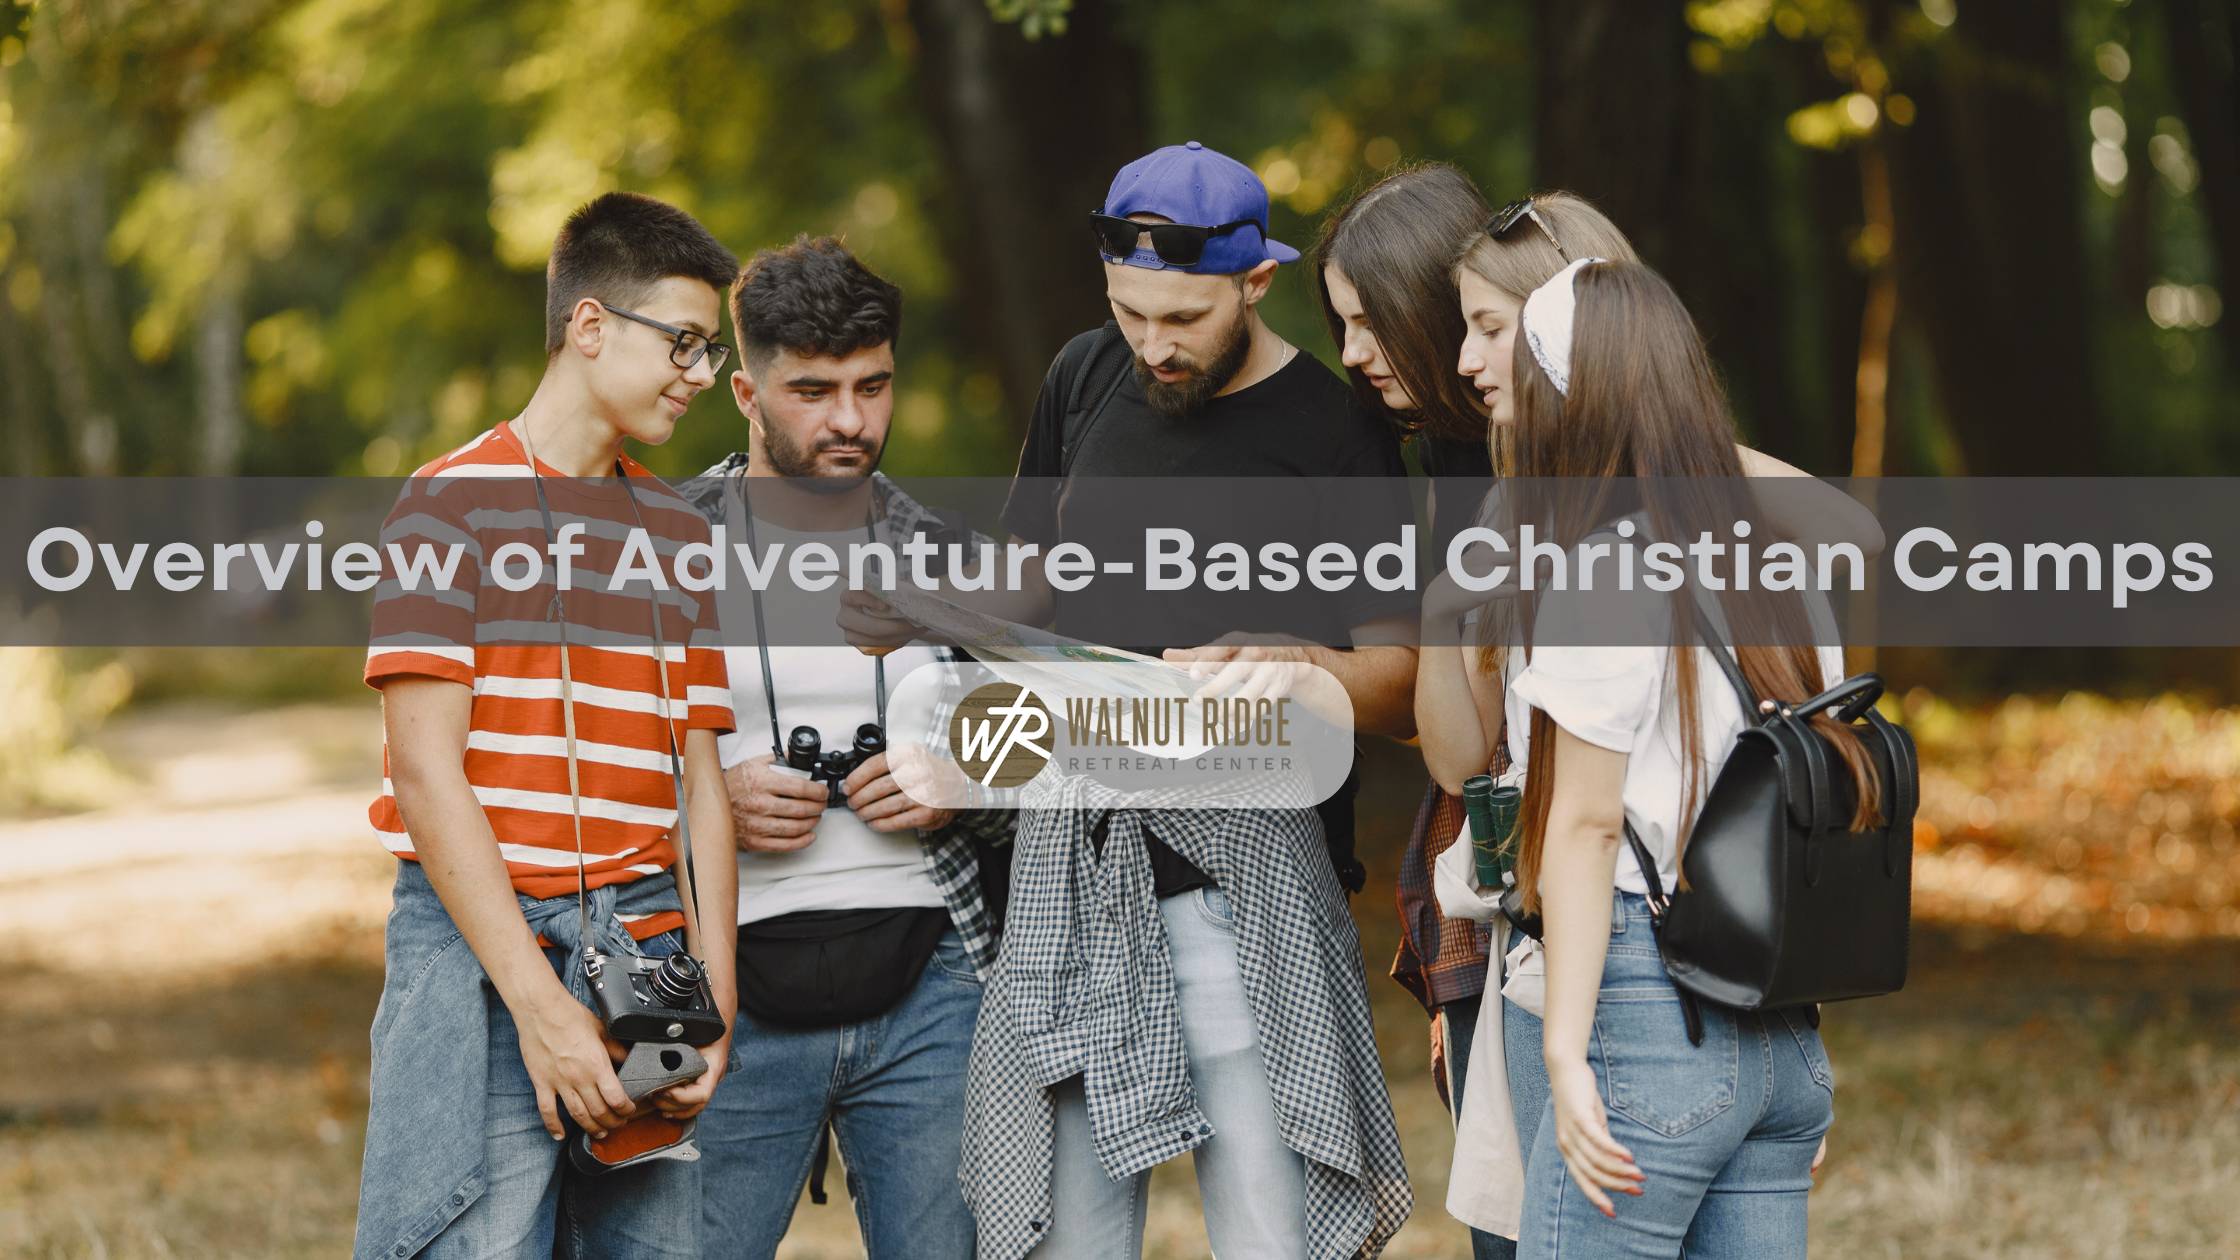 Overview of Adventure-Based Christian Camps